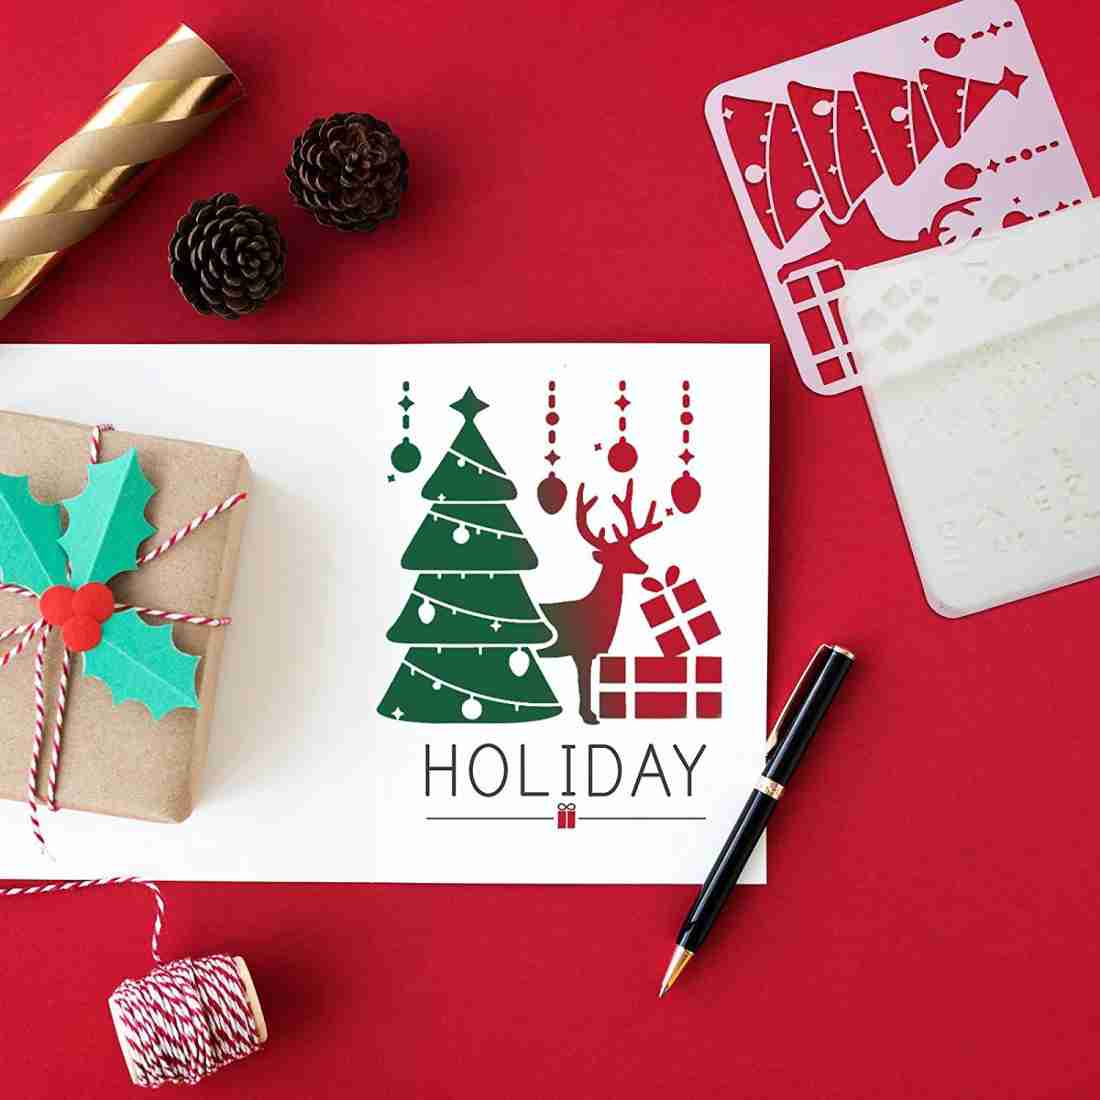 12Pcs Christmas Stencils for Painting on Wood Reusable Christmas Template  for Wood Signs Canvas Windows Cookies Art & DIY Crafts